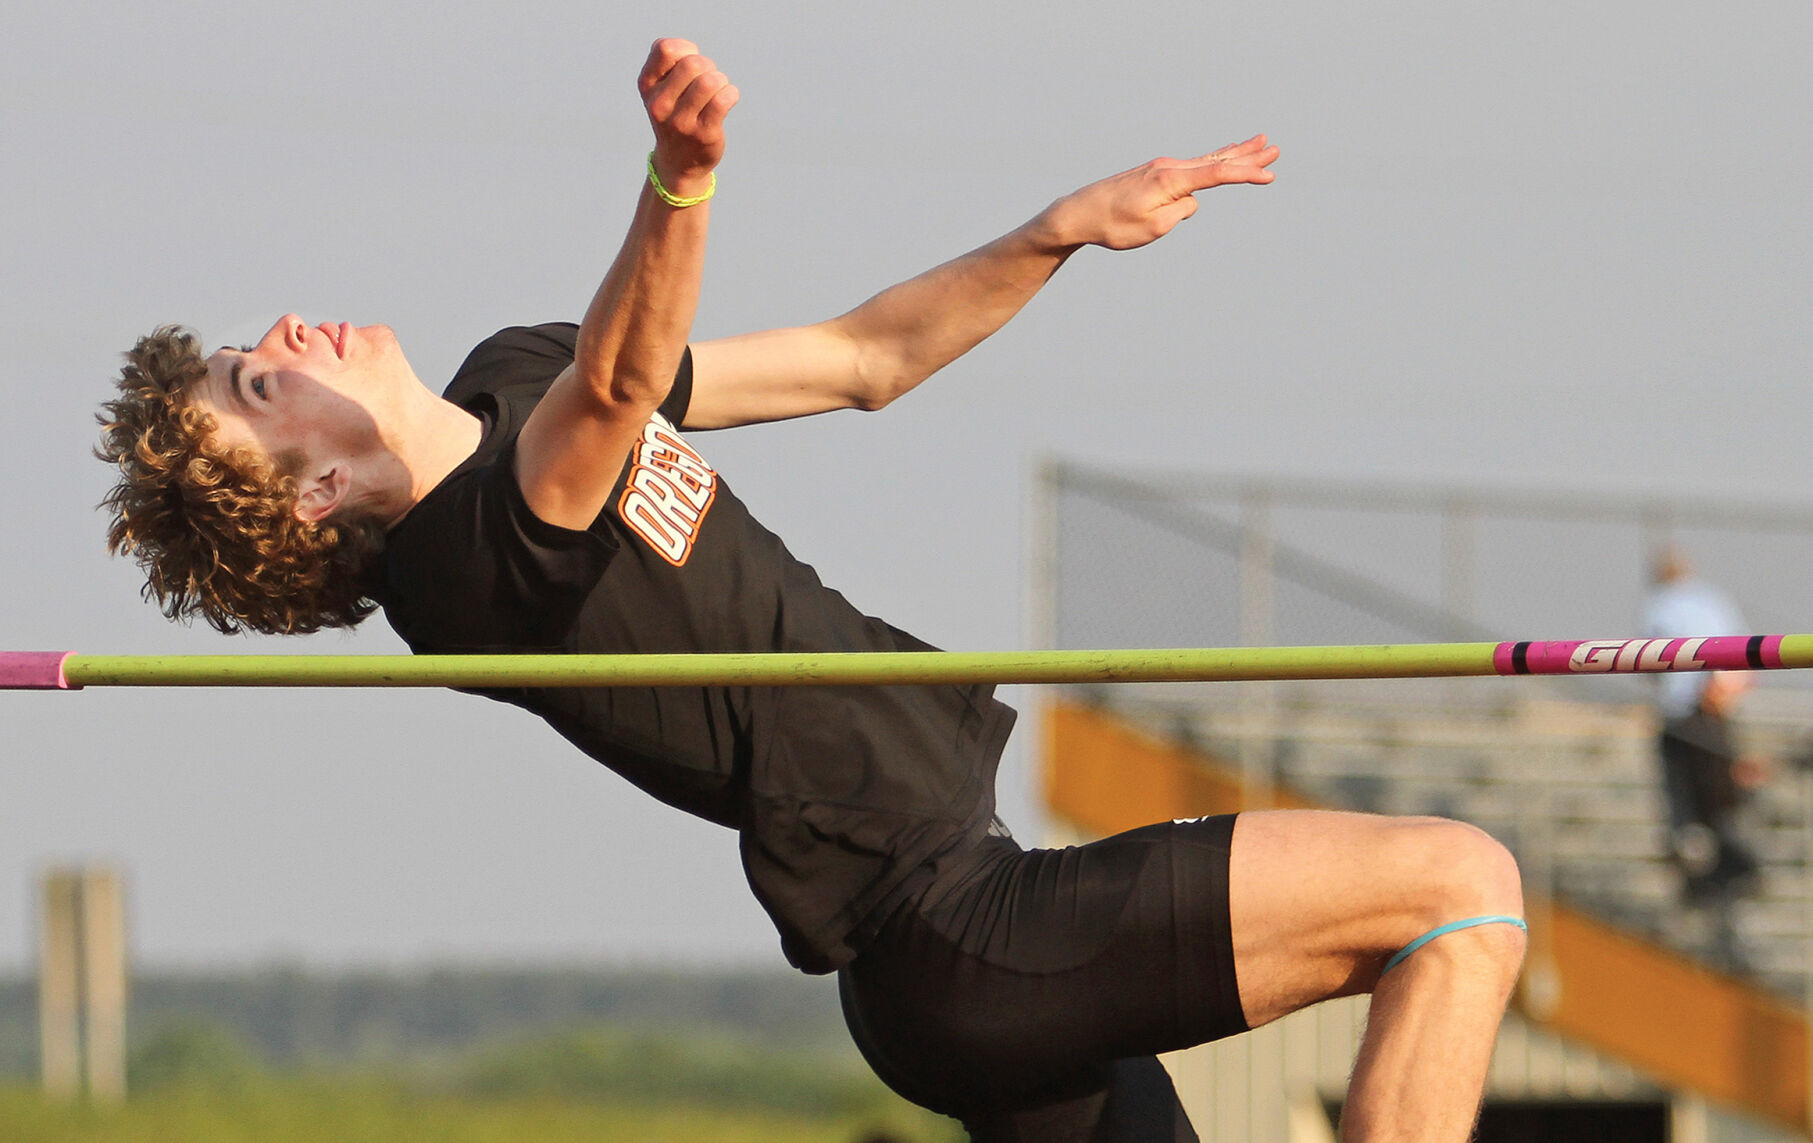 Oregon’s Yoerger Sets New Pole Vault Record and Leads Team to Third Place in Conference Meet